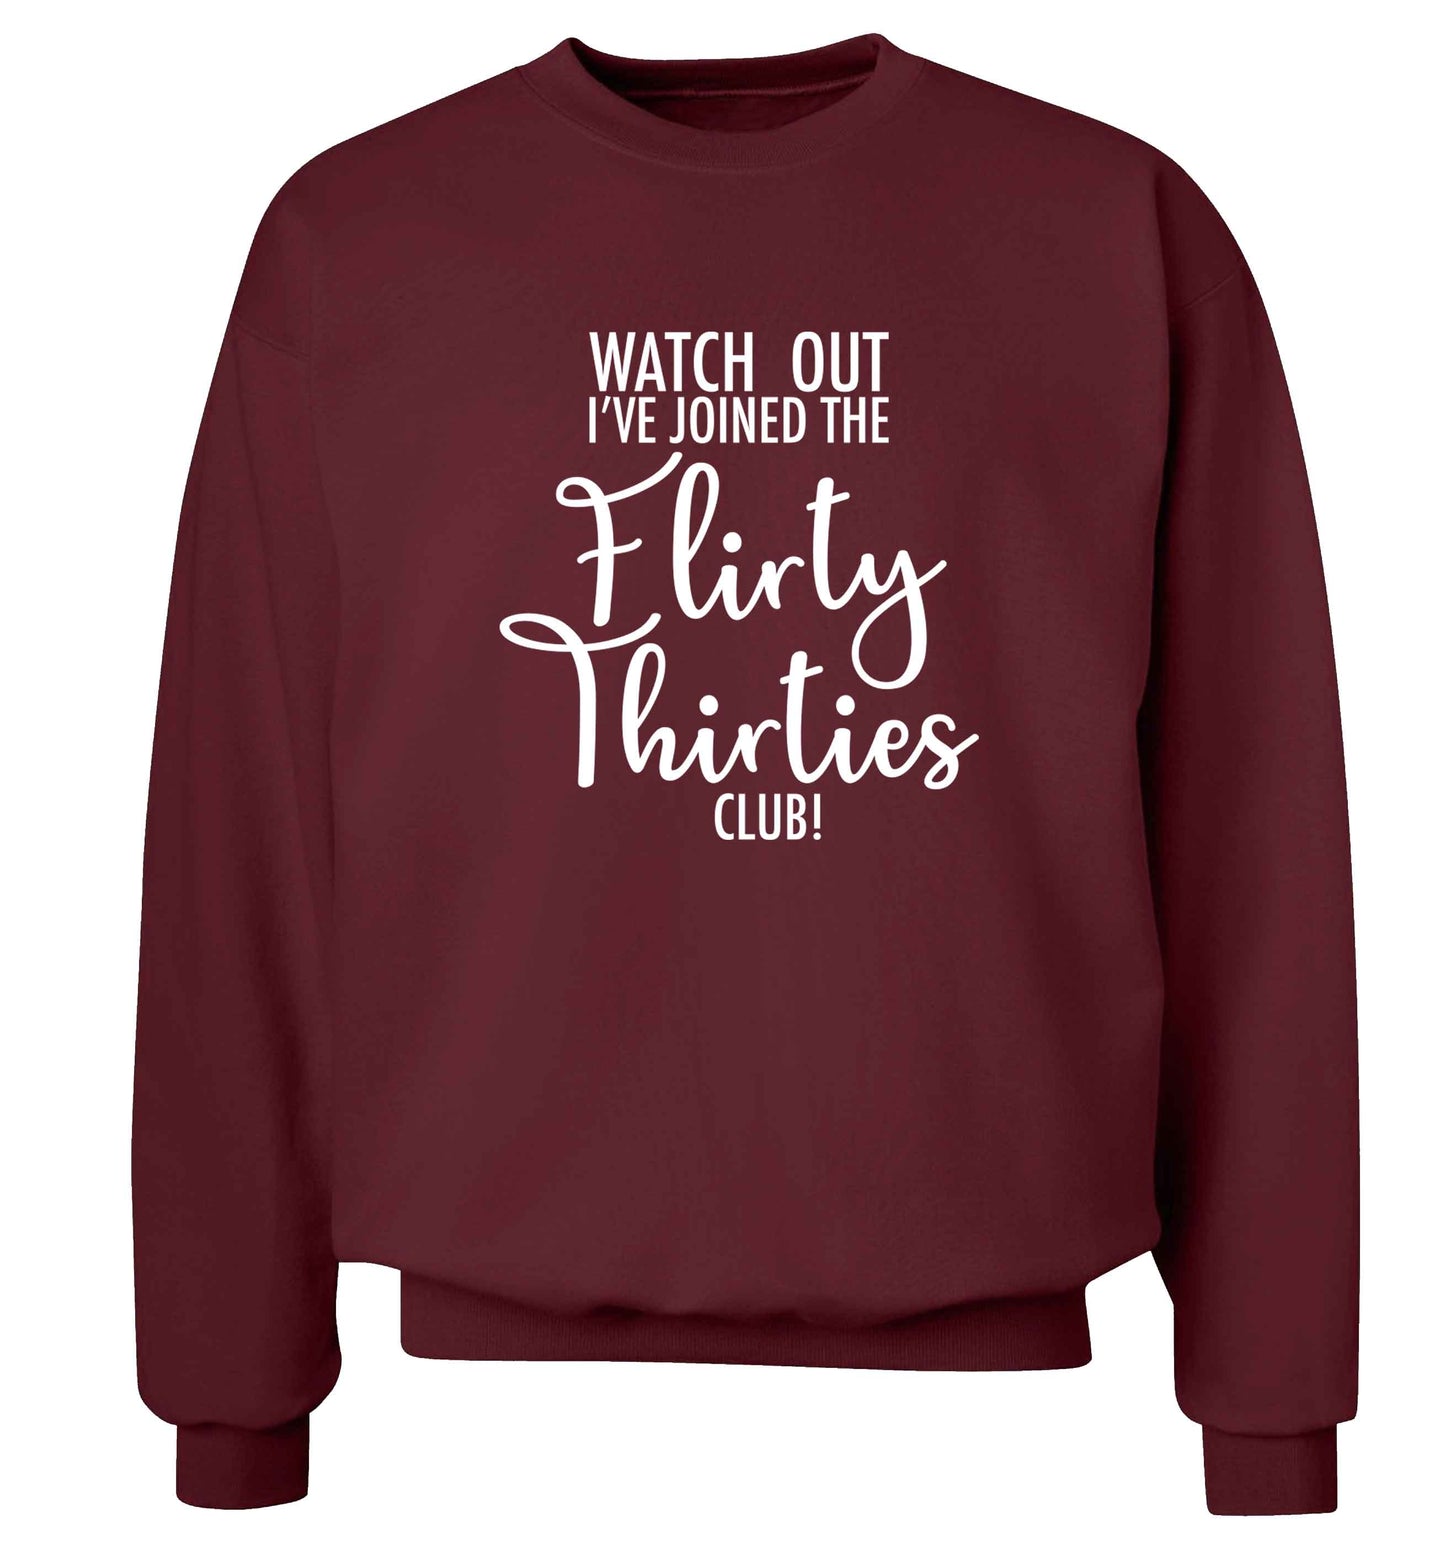 Watch out I've joined the flirty thirties club adult's unisex maroon sweater 2XL